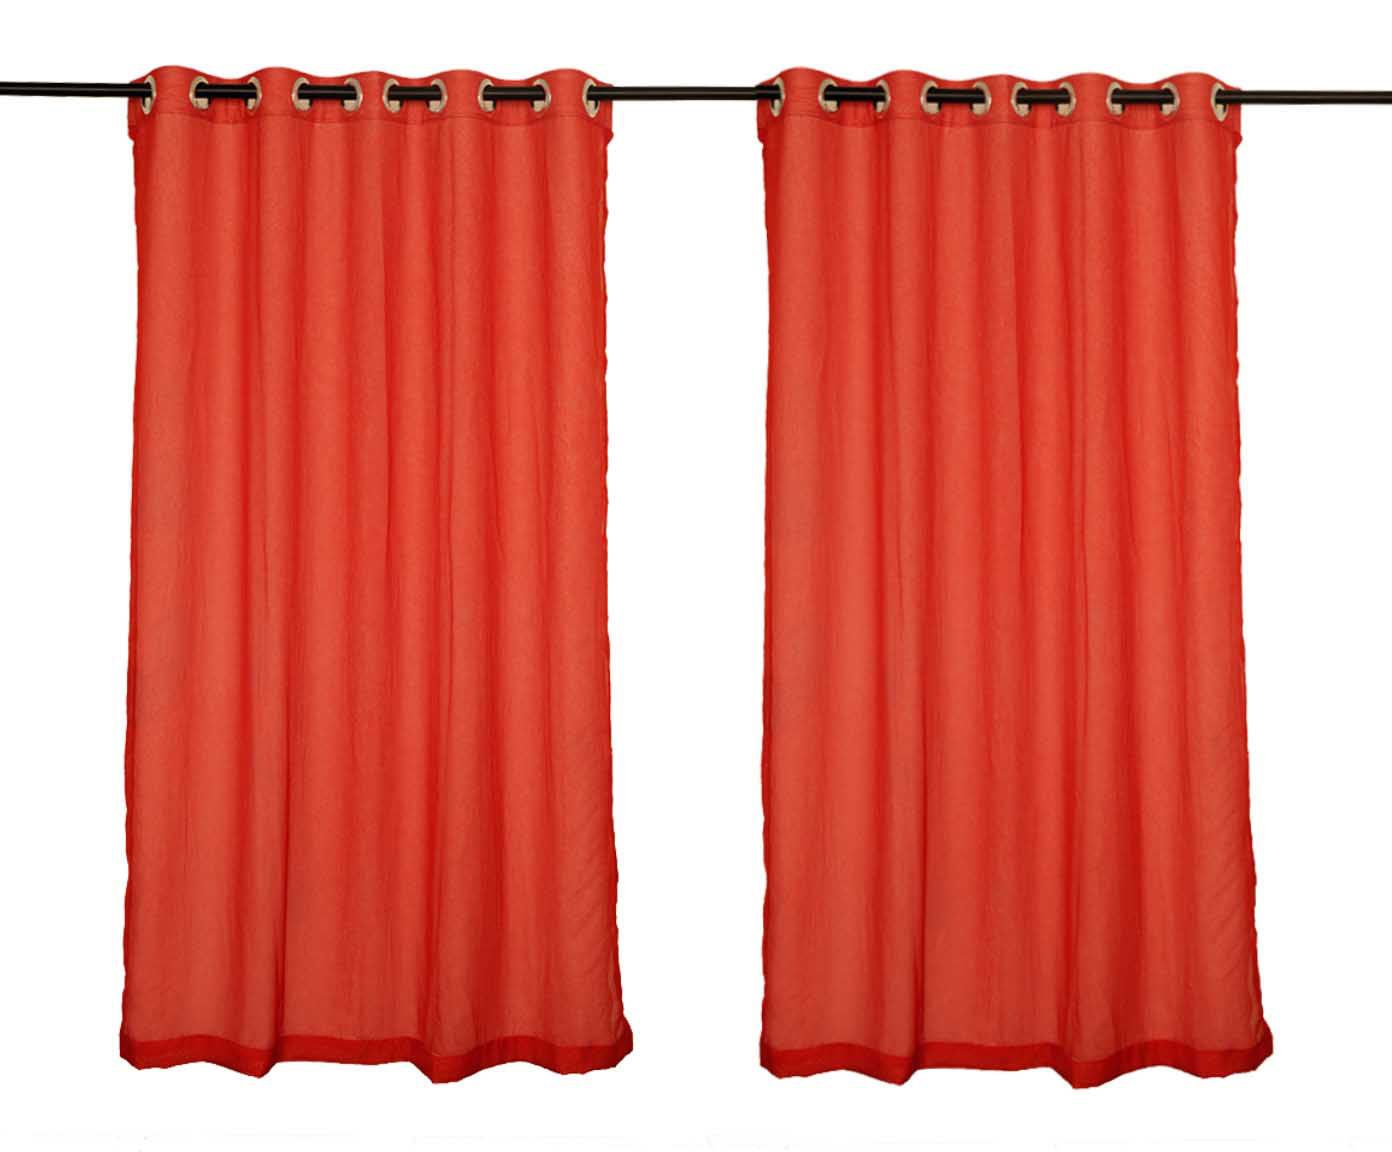 Cortina cromo passion - 200 x 230 cm | Westwing.com.br